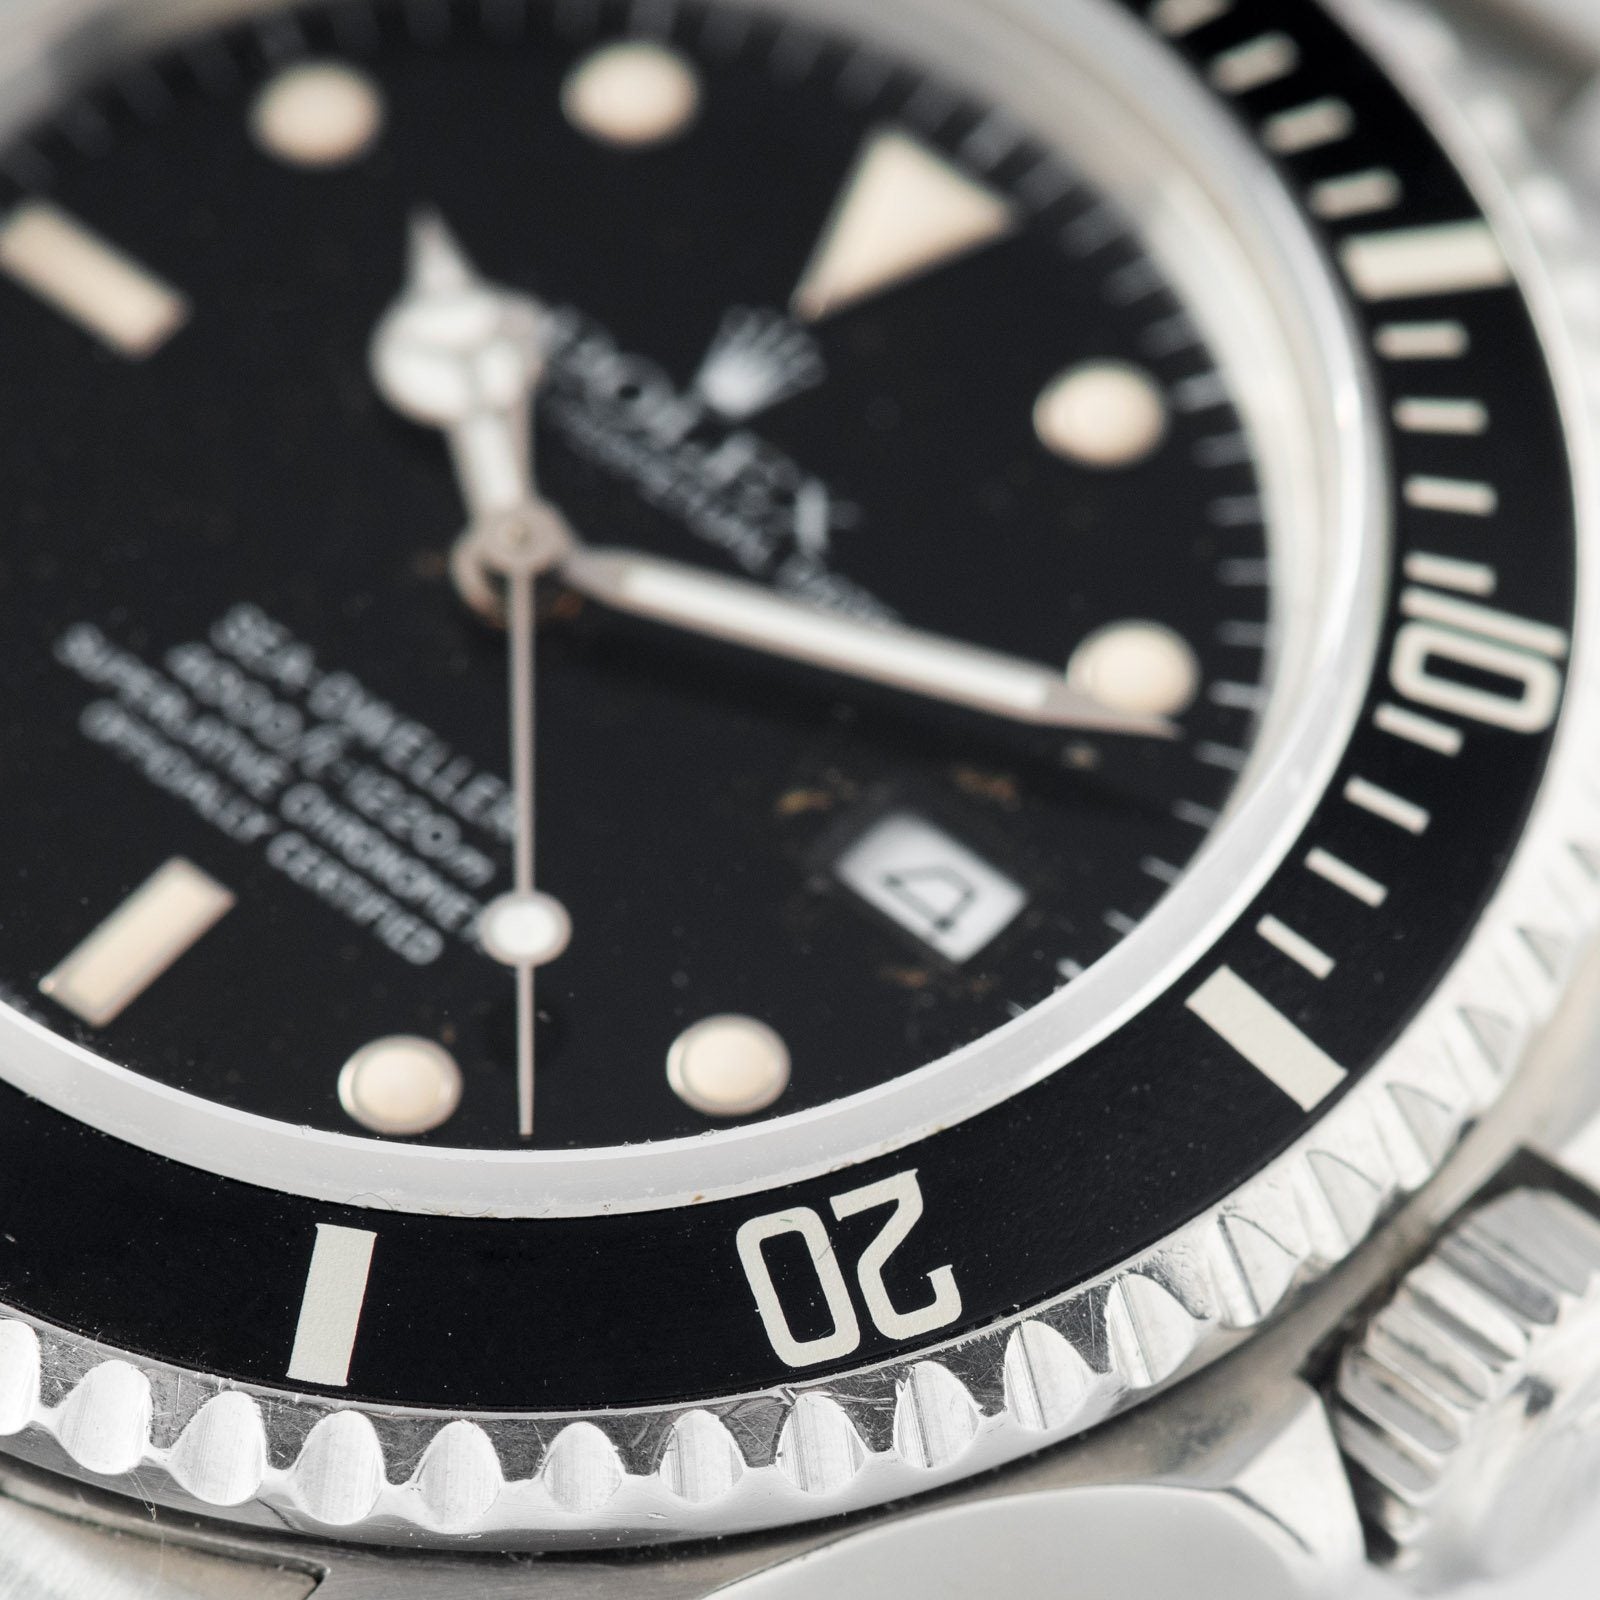 Rolex Seadweller Reference 16660 Box and Papers